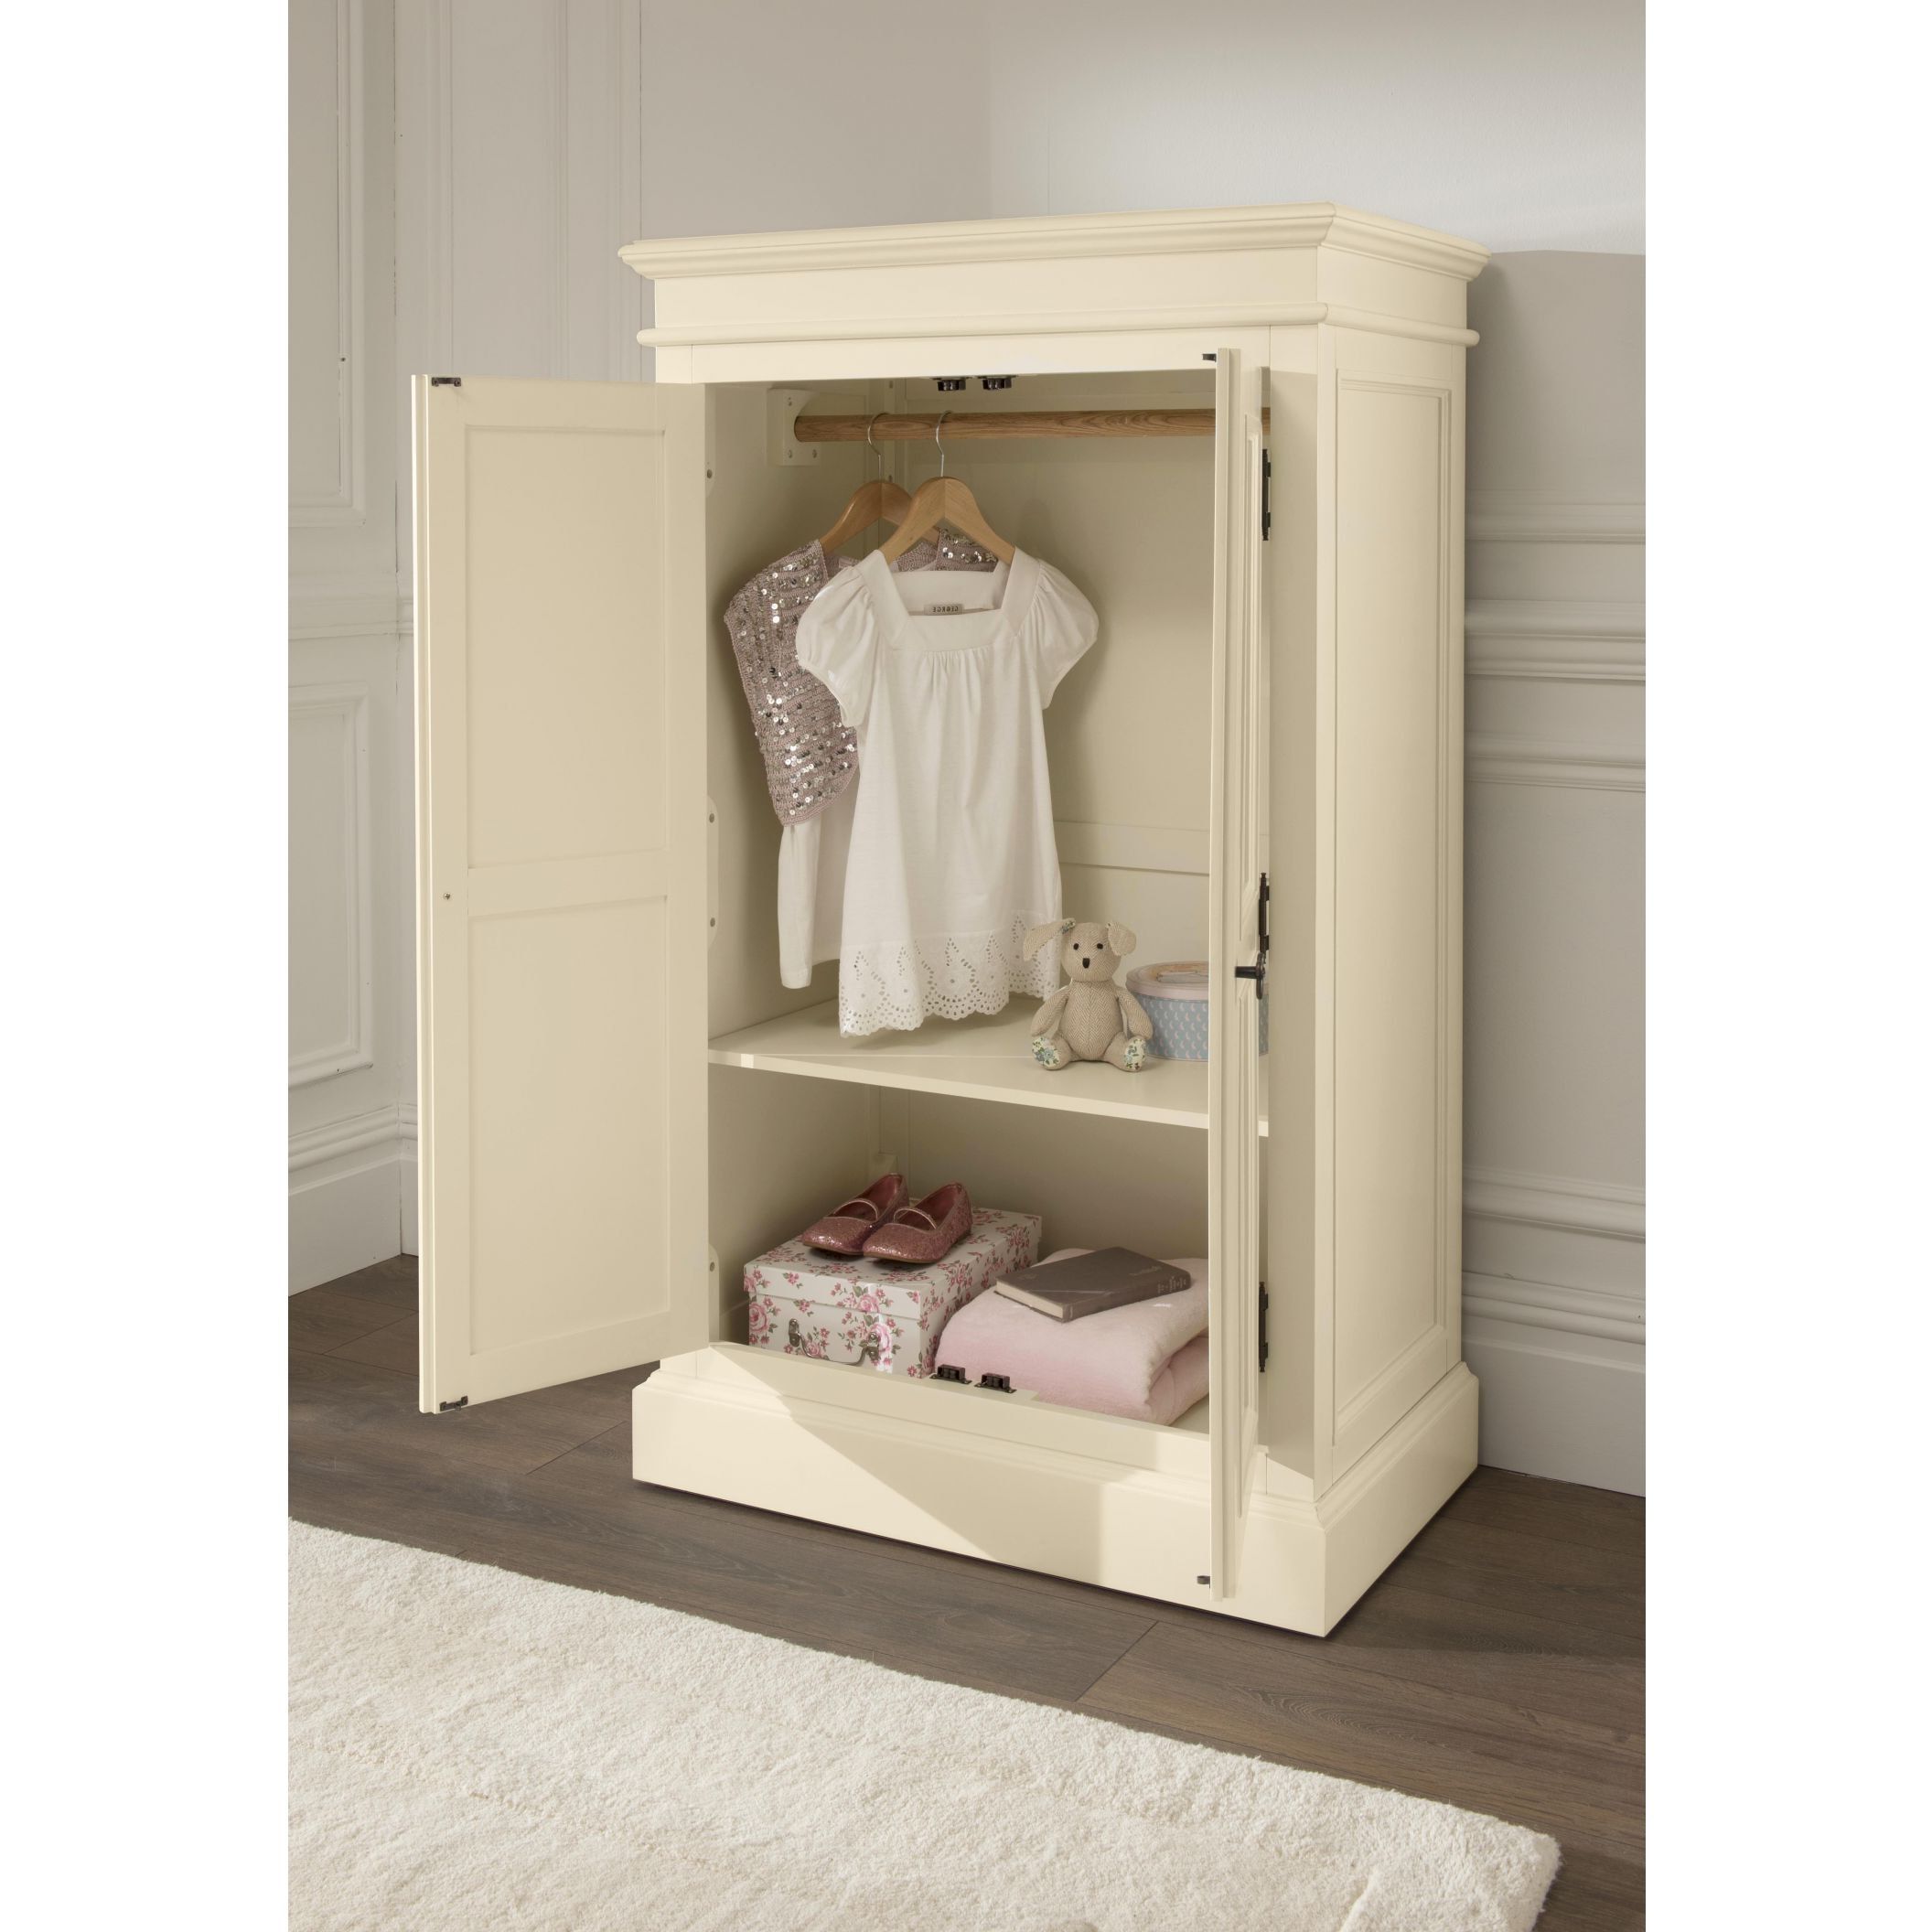 Brittany Shabby Chic Small Wardrobe Throughout Small Wardrobes (Gallery 16 of 20)